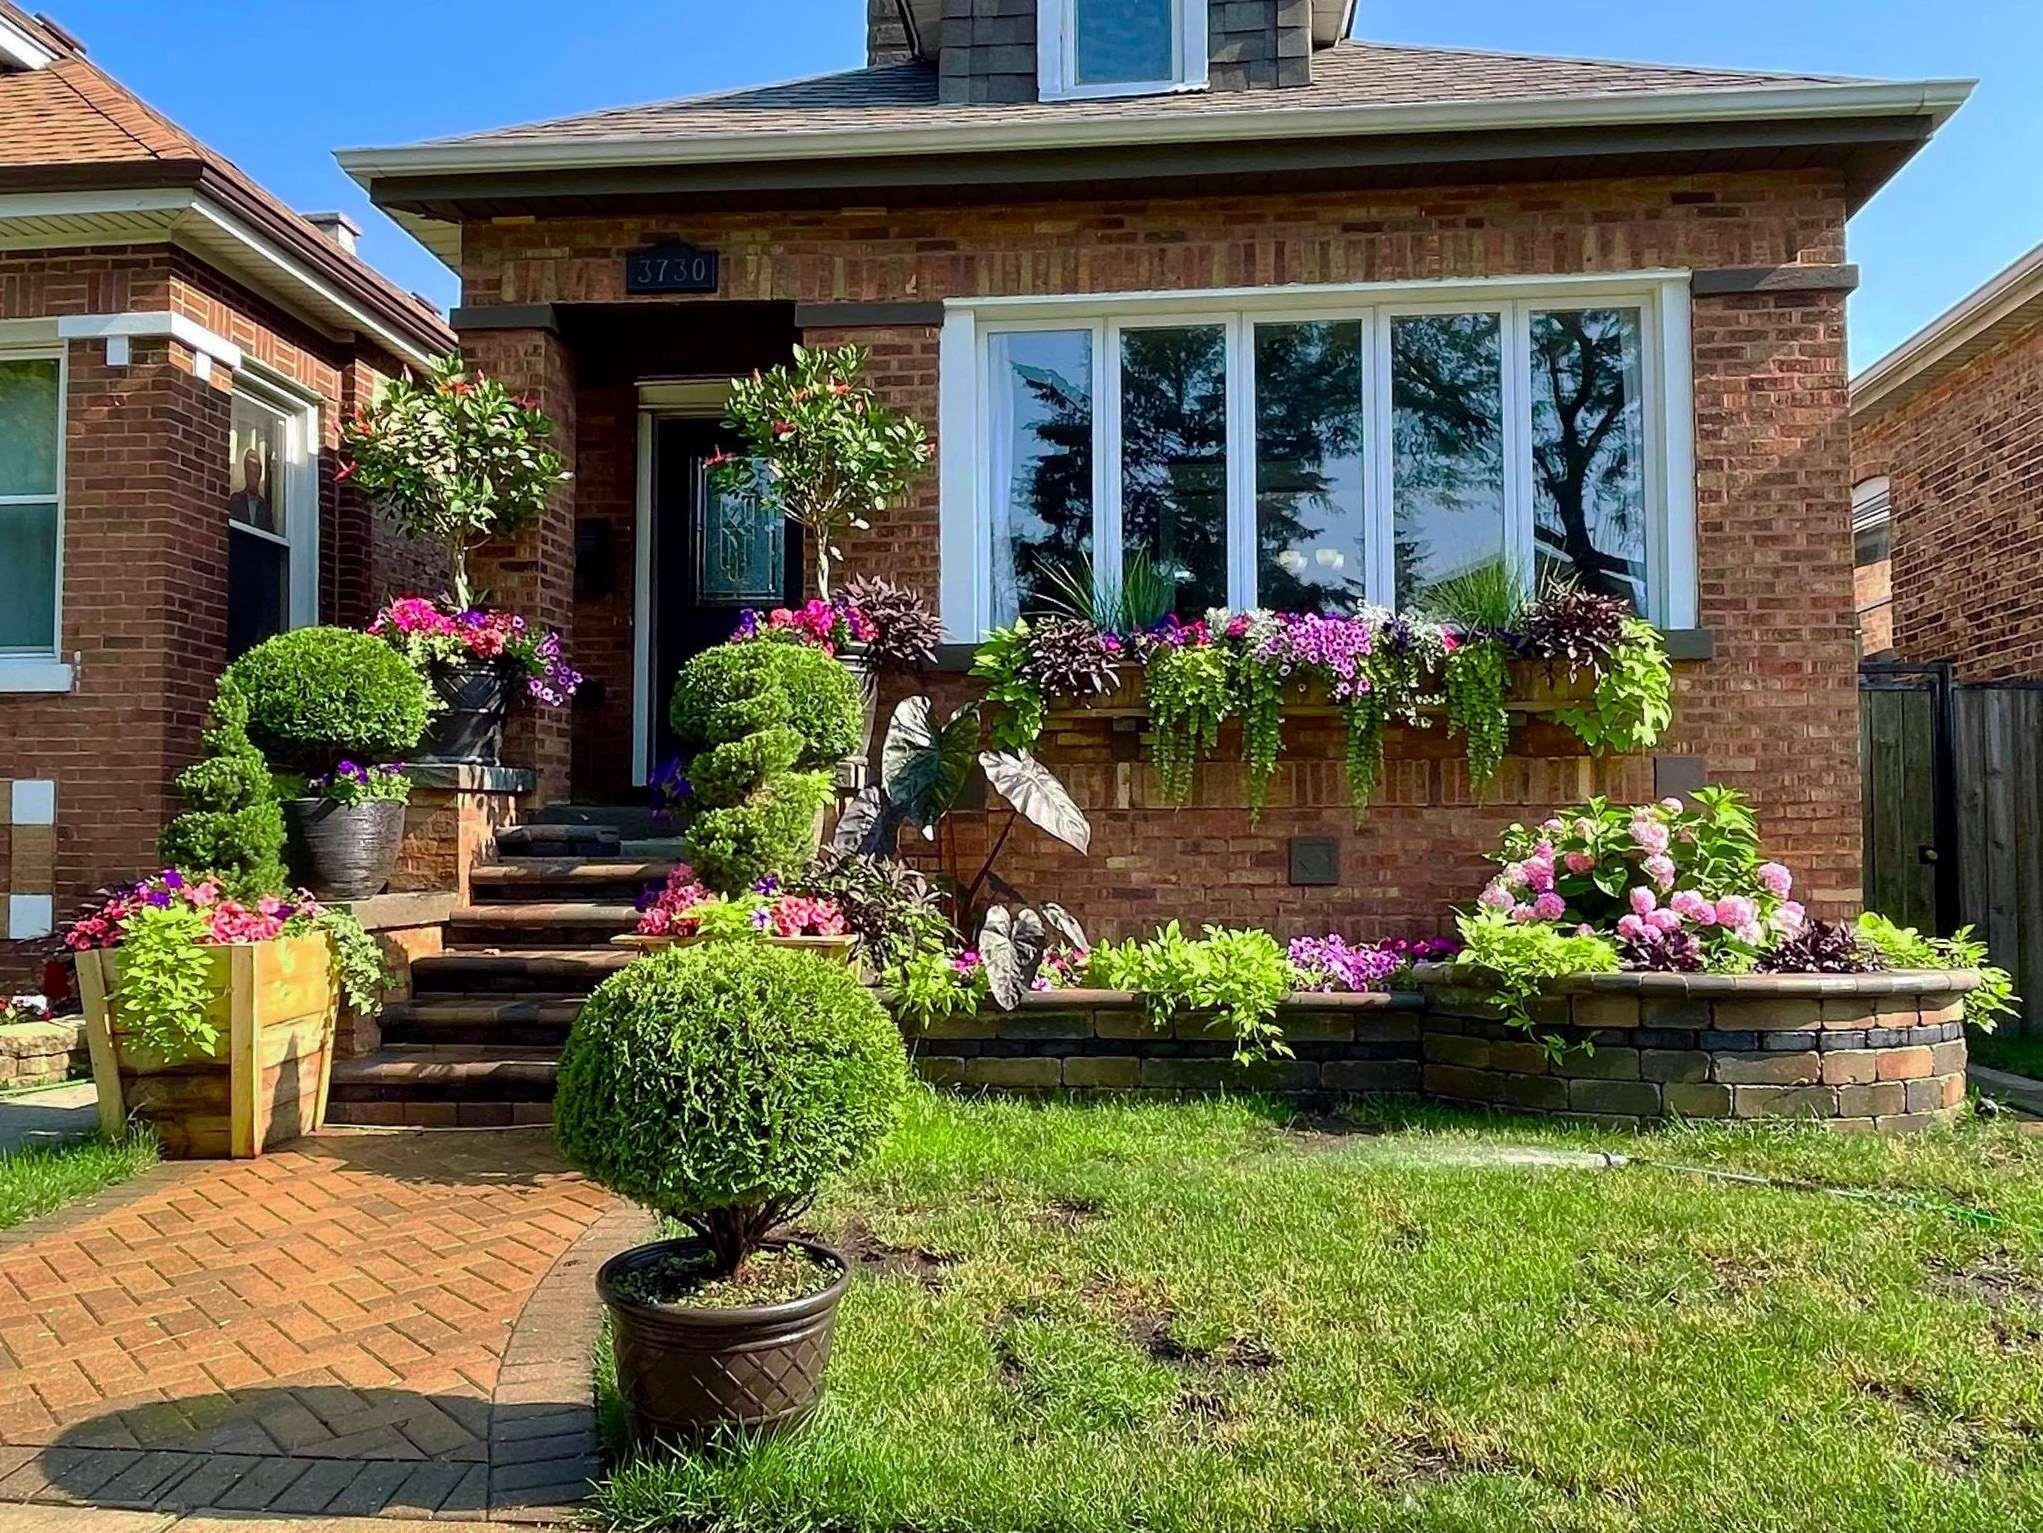 West Lawn residents Mitzi and Gilberto Cantu won the window/planter box category in the Chicago Bungalow Association’s fifth annual garden contest. (Chicago Bungalow Association)